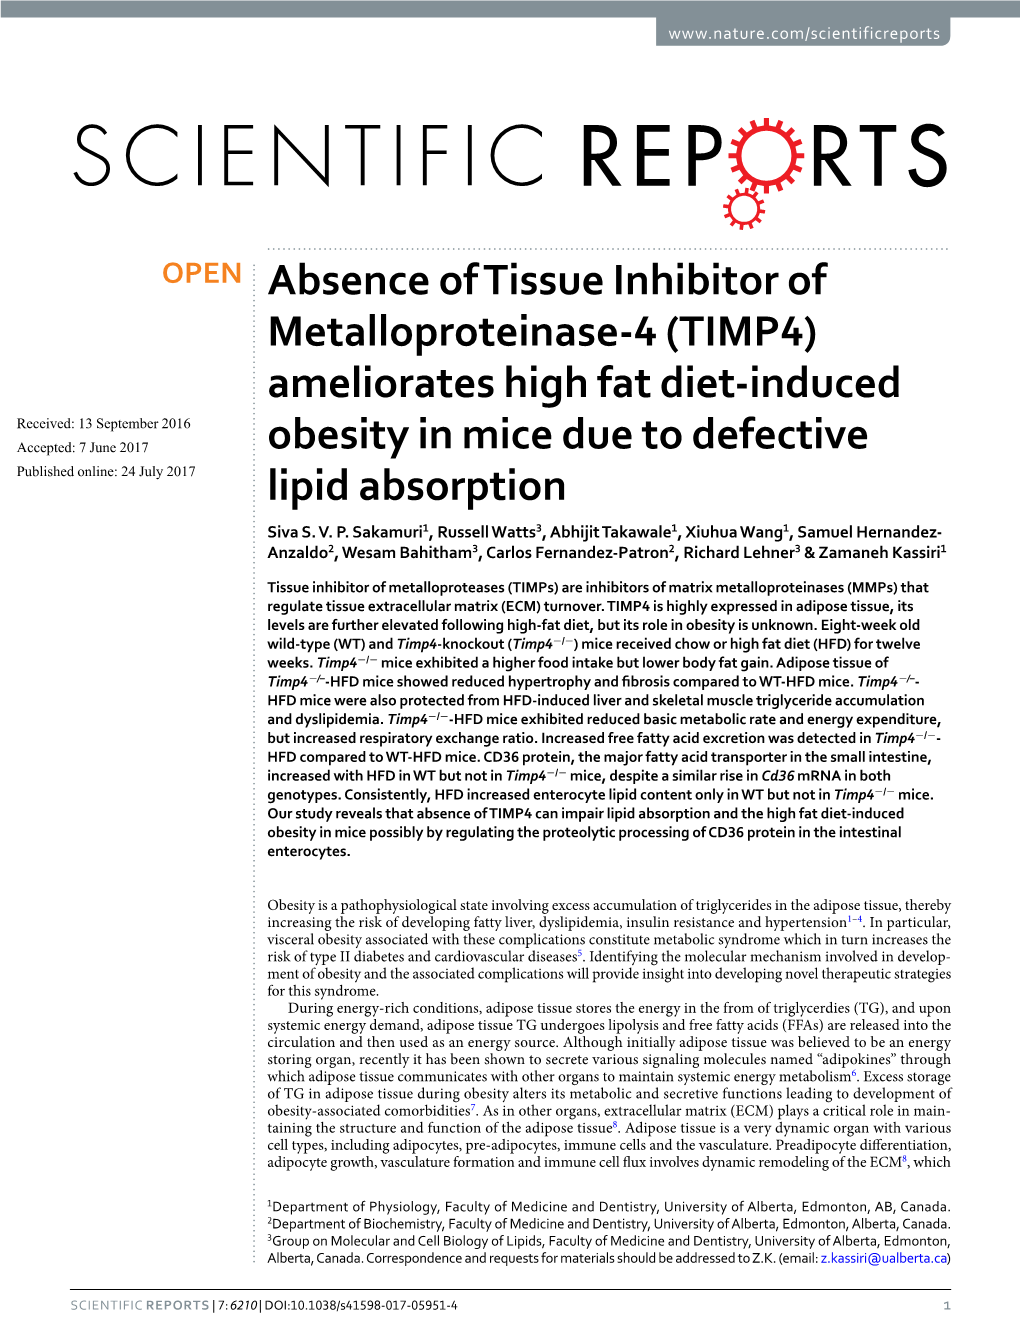 Absence of Tissue Inhibitor of Metalloproteinase-4 (TIMP4